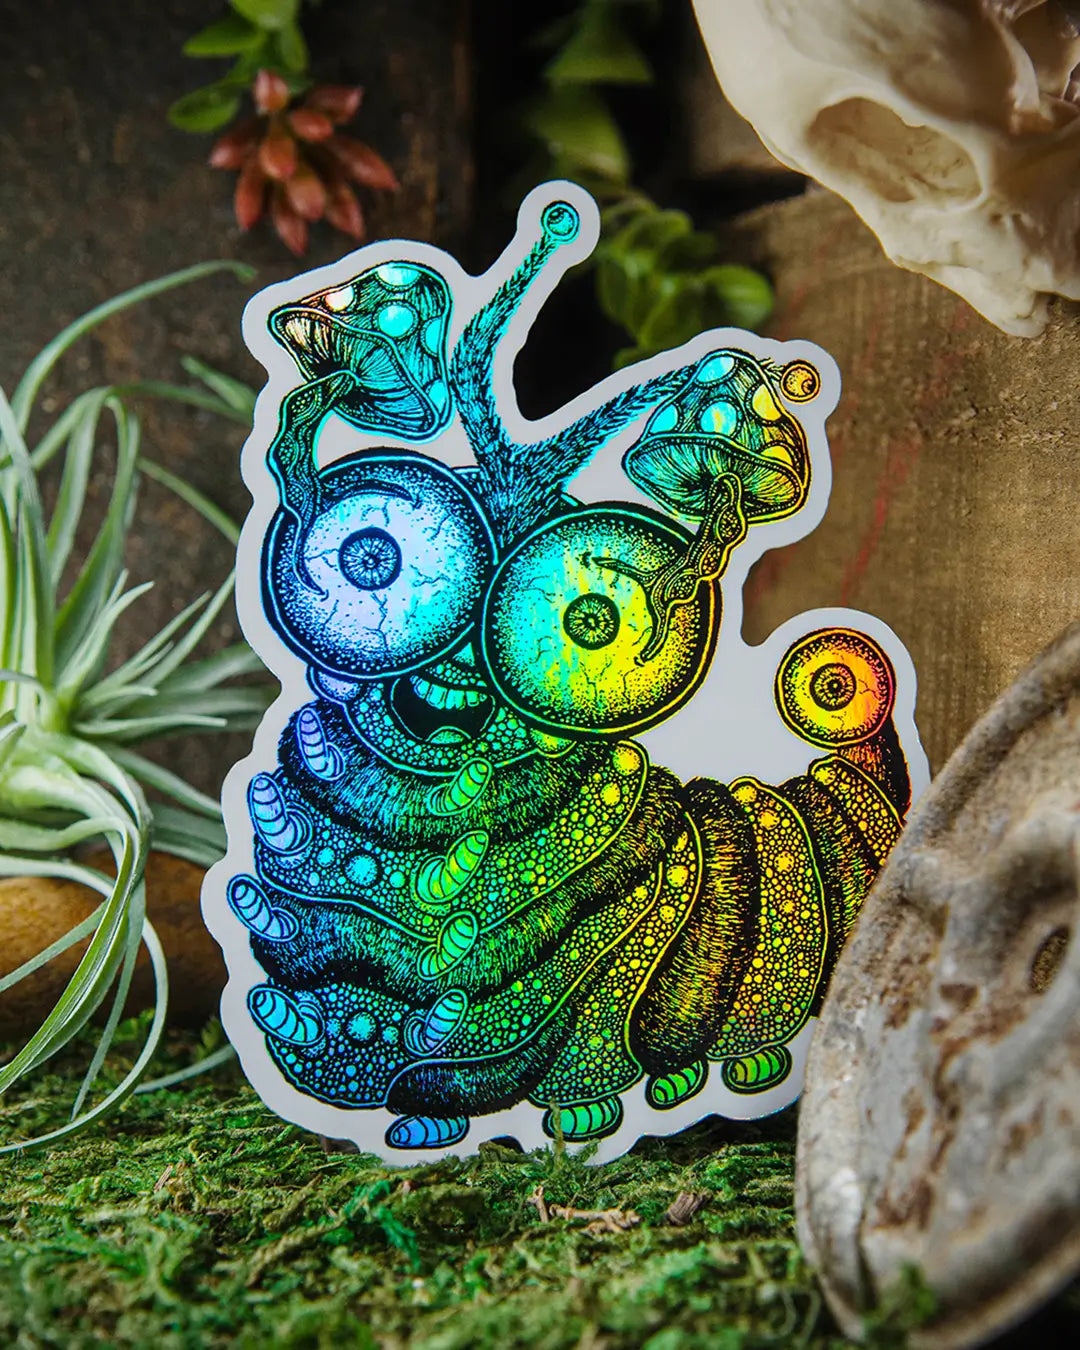 Holographic Stickers Printing